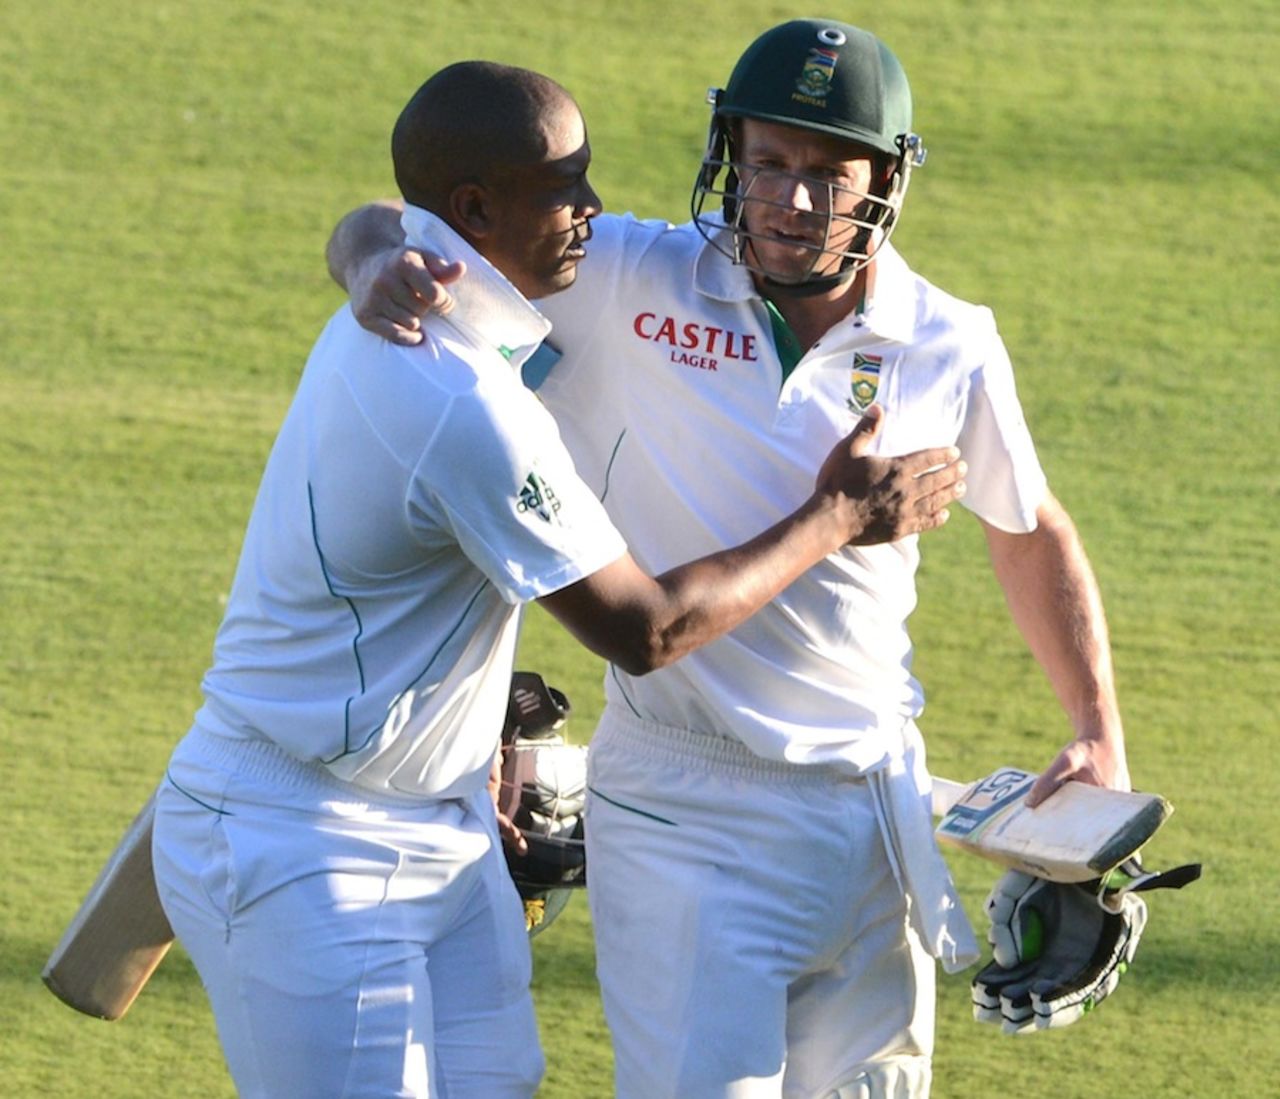 Vernon Philander and AB de Villiers walk back at the end of day's play, South Africa v Pakistan, 3rd Test, Centurion, 1st day, February 22, 2013